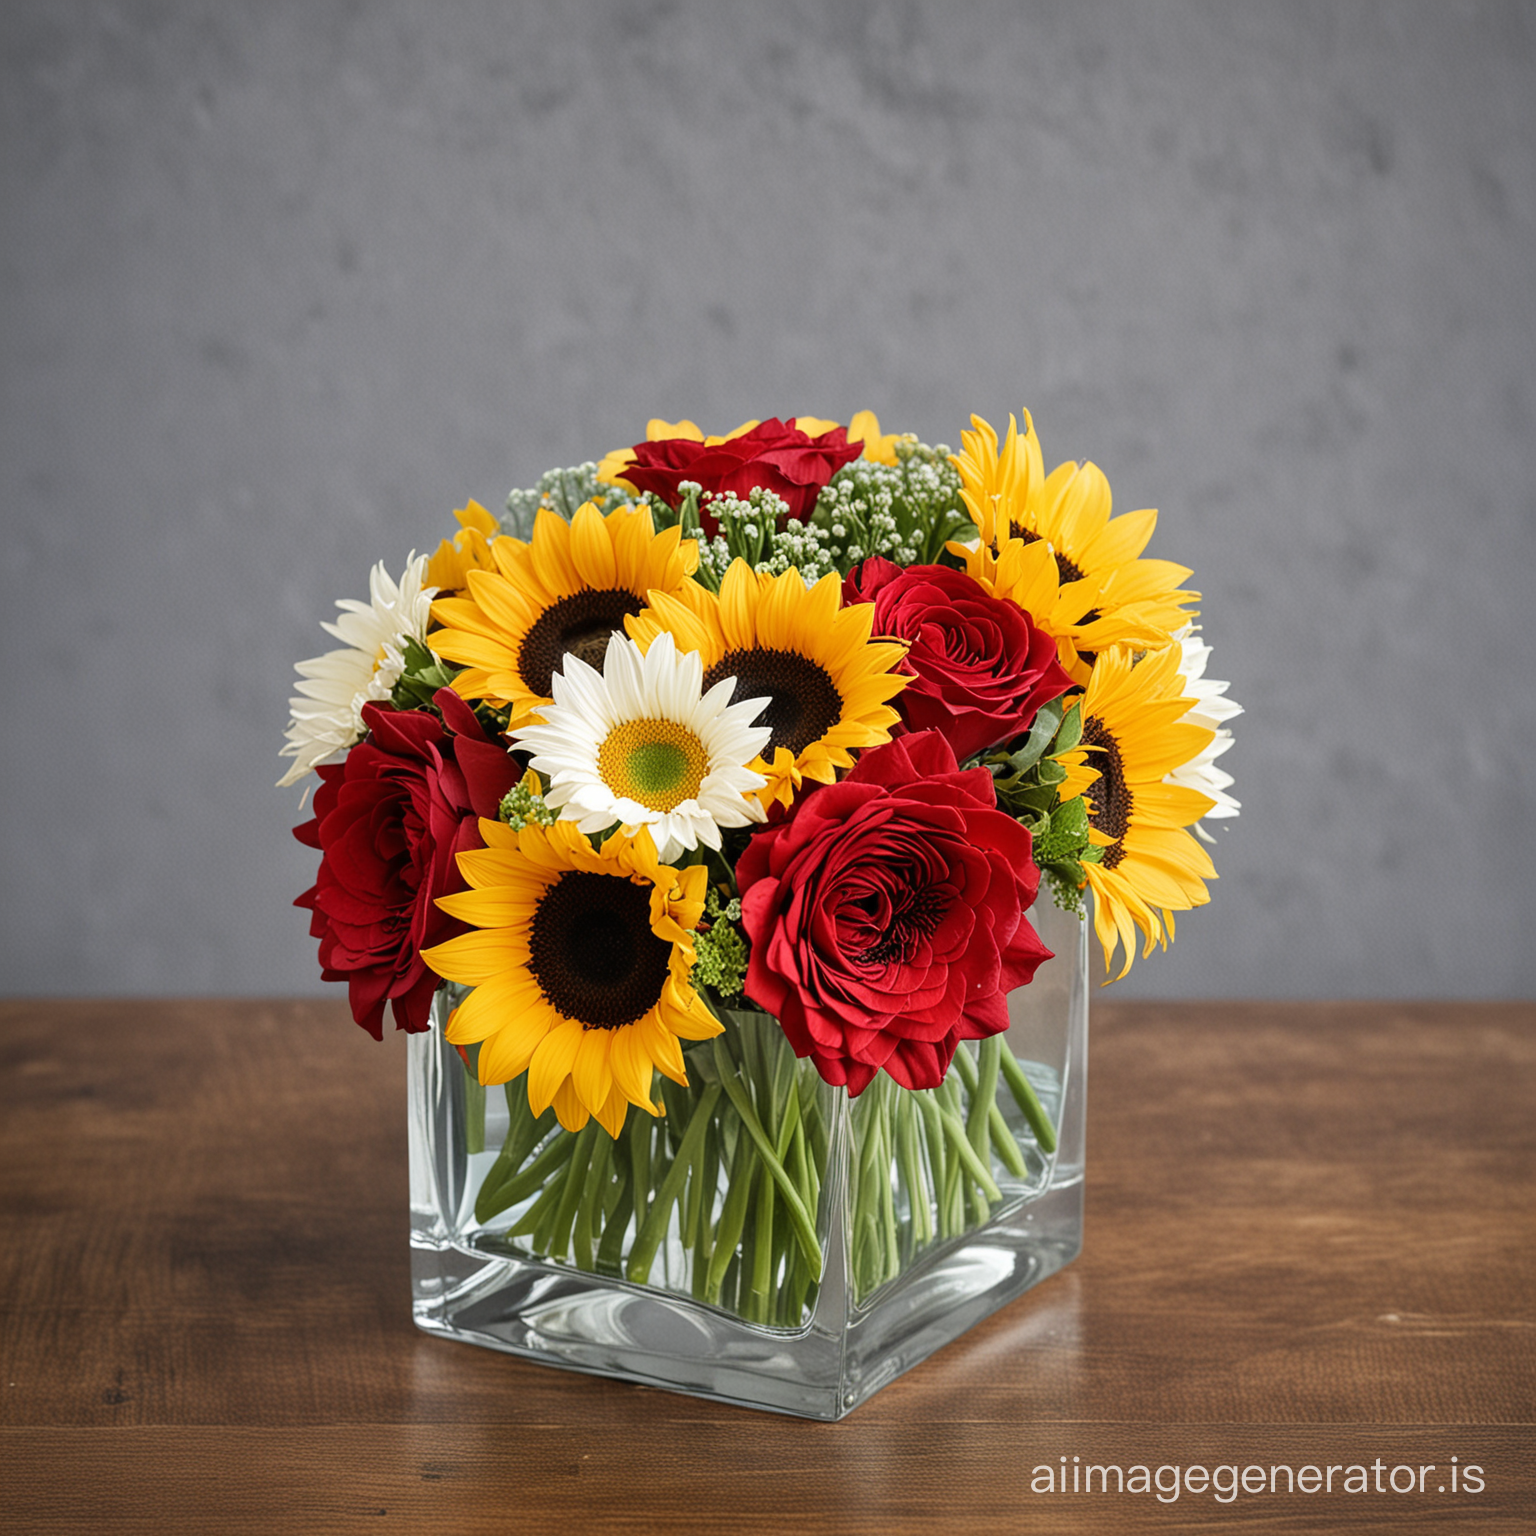 a small glass square vase filled with water and sunflowers and red roses